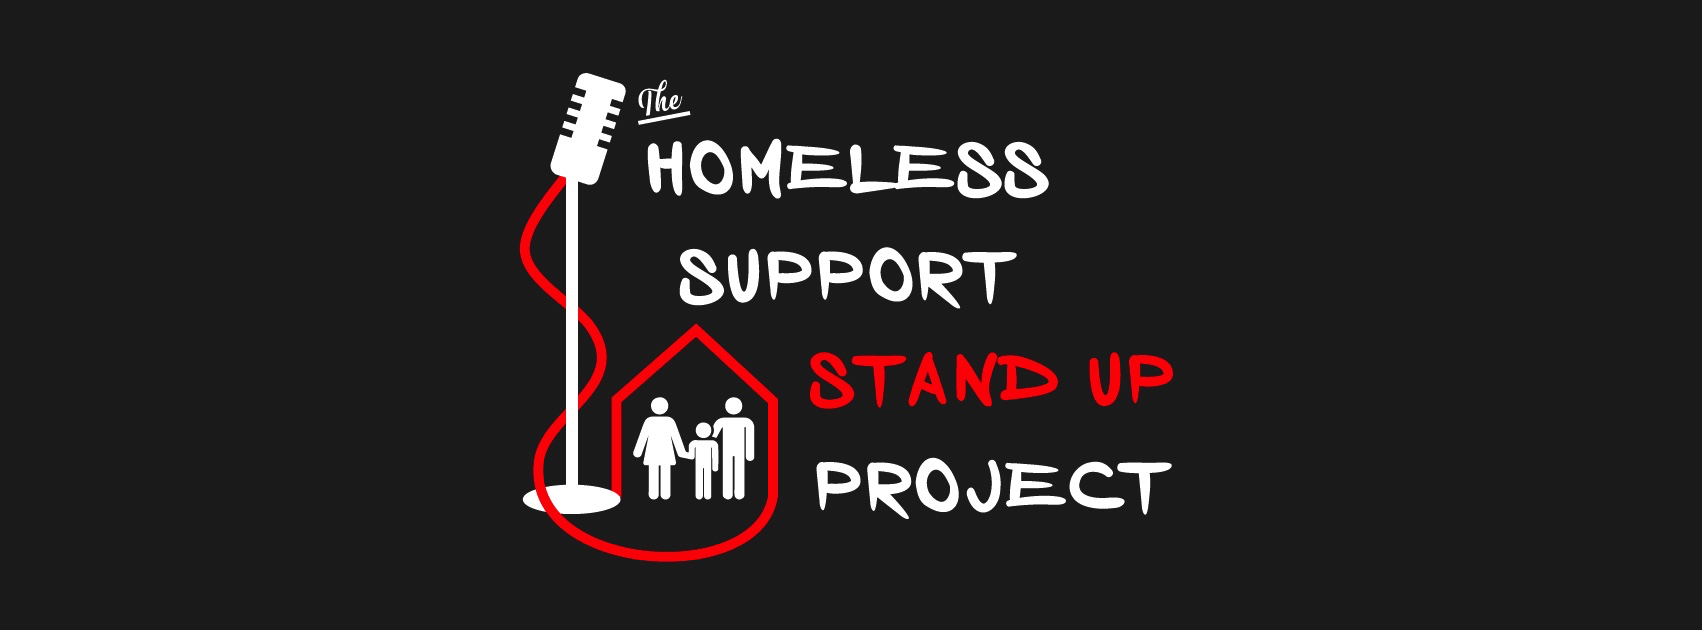 The Homeless Support Stand-Up Project